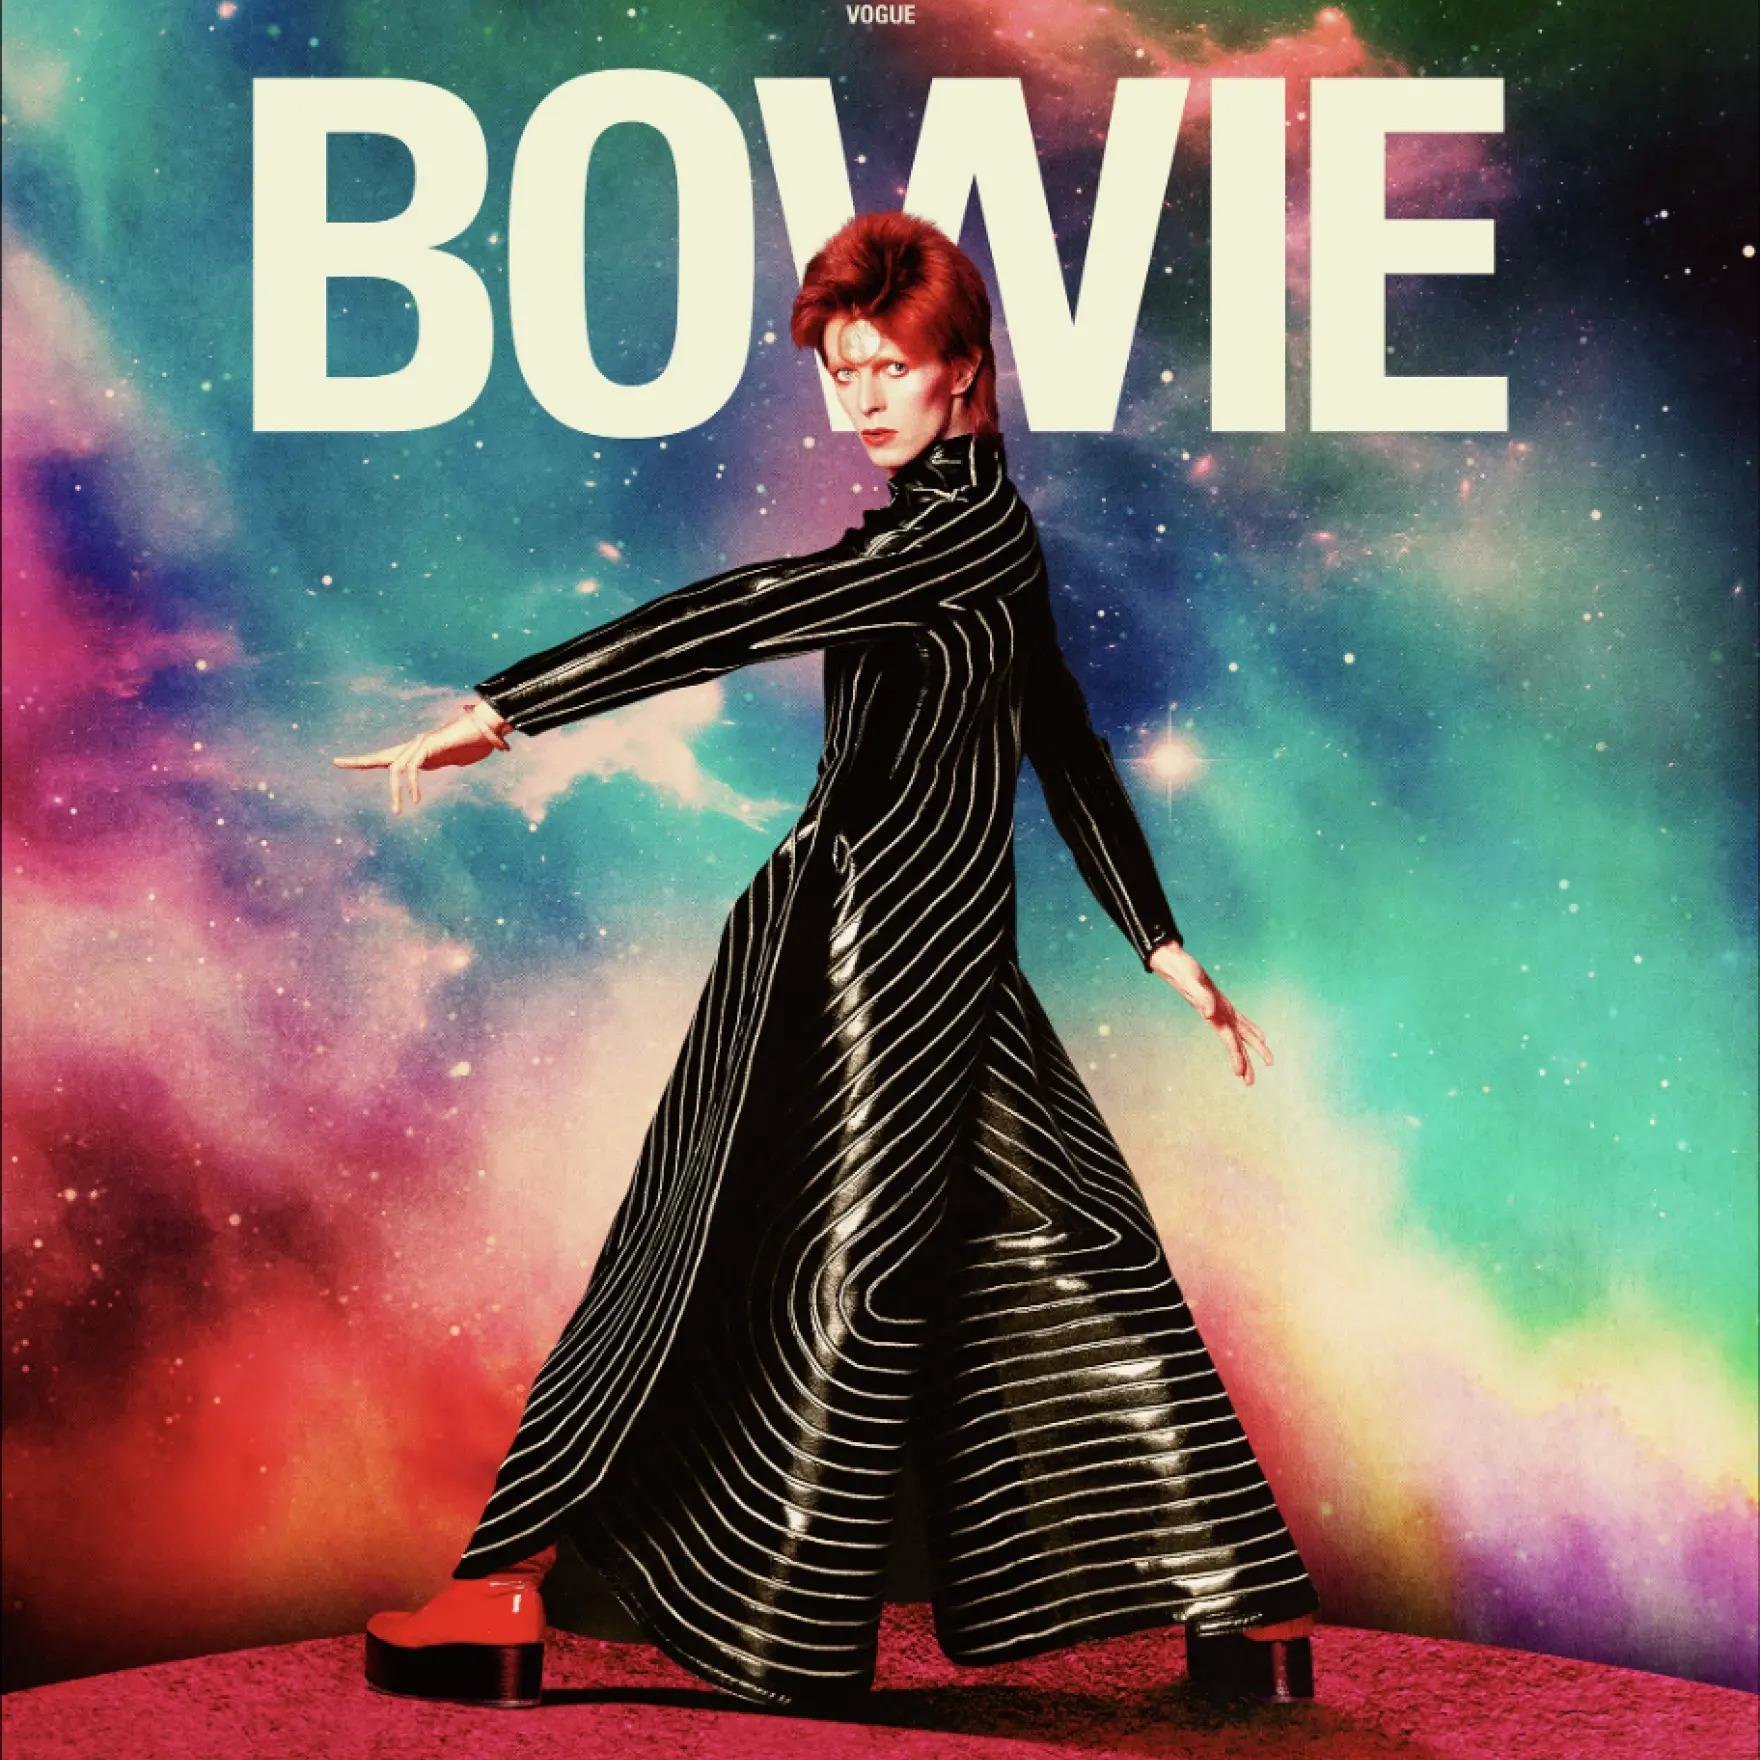 Bowie Moonage Daydream Movie Ticket for Free